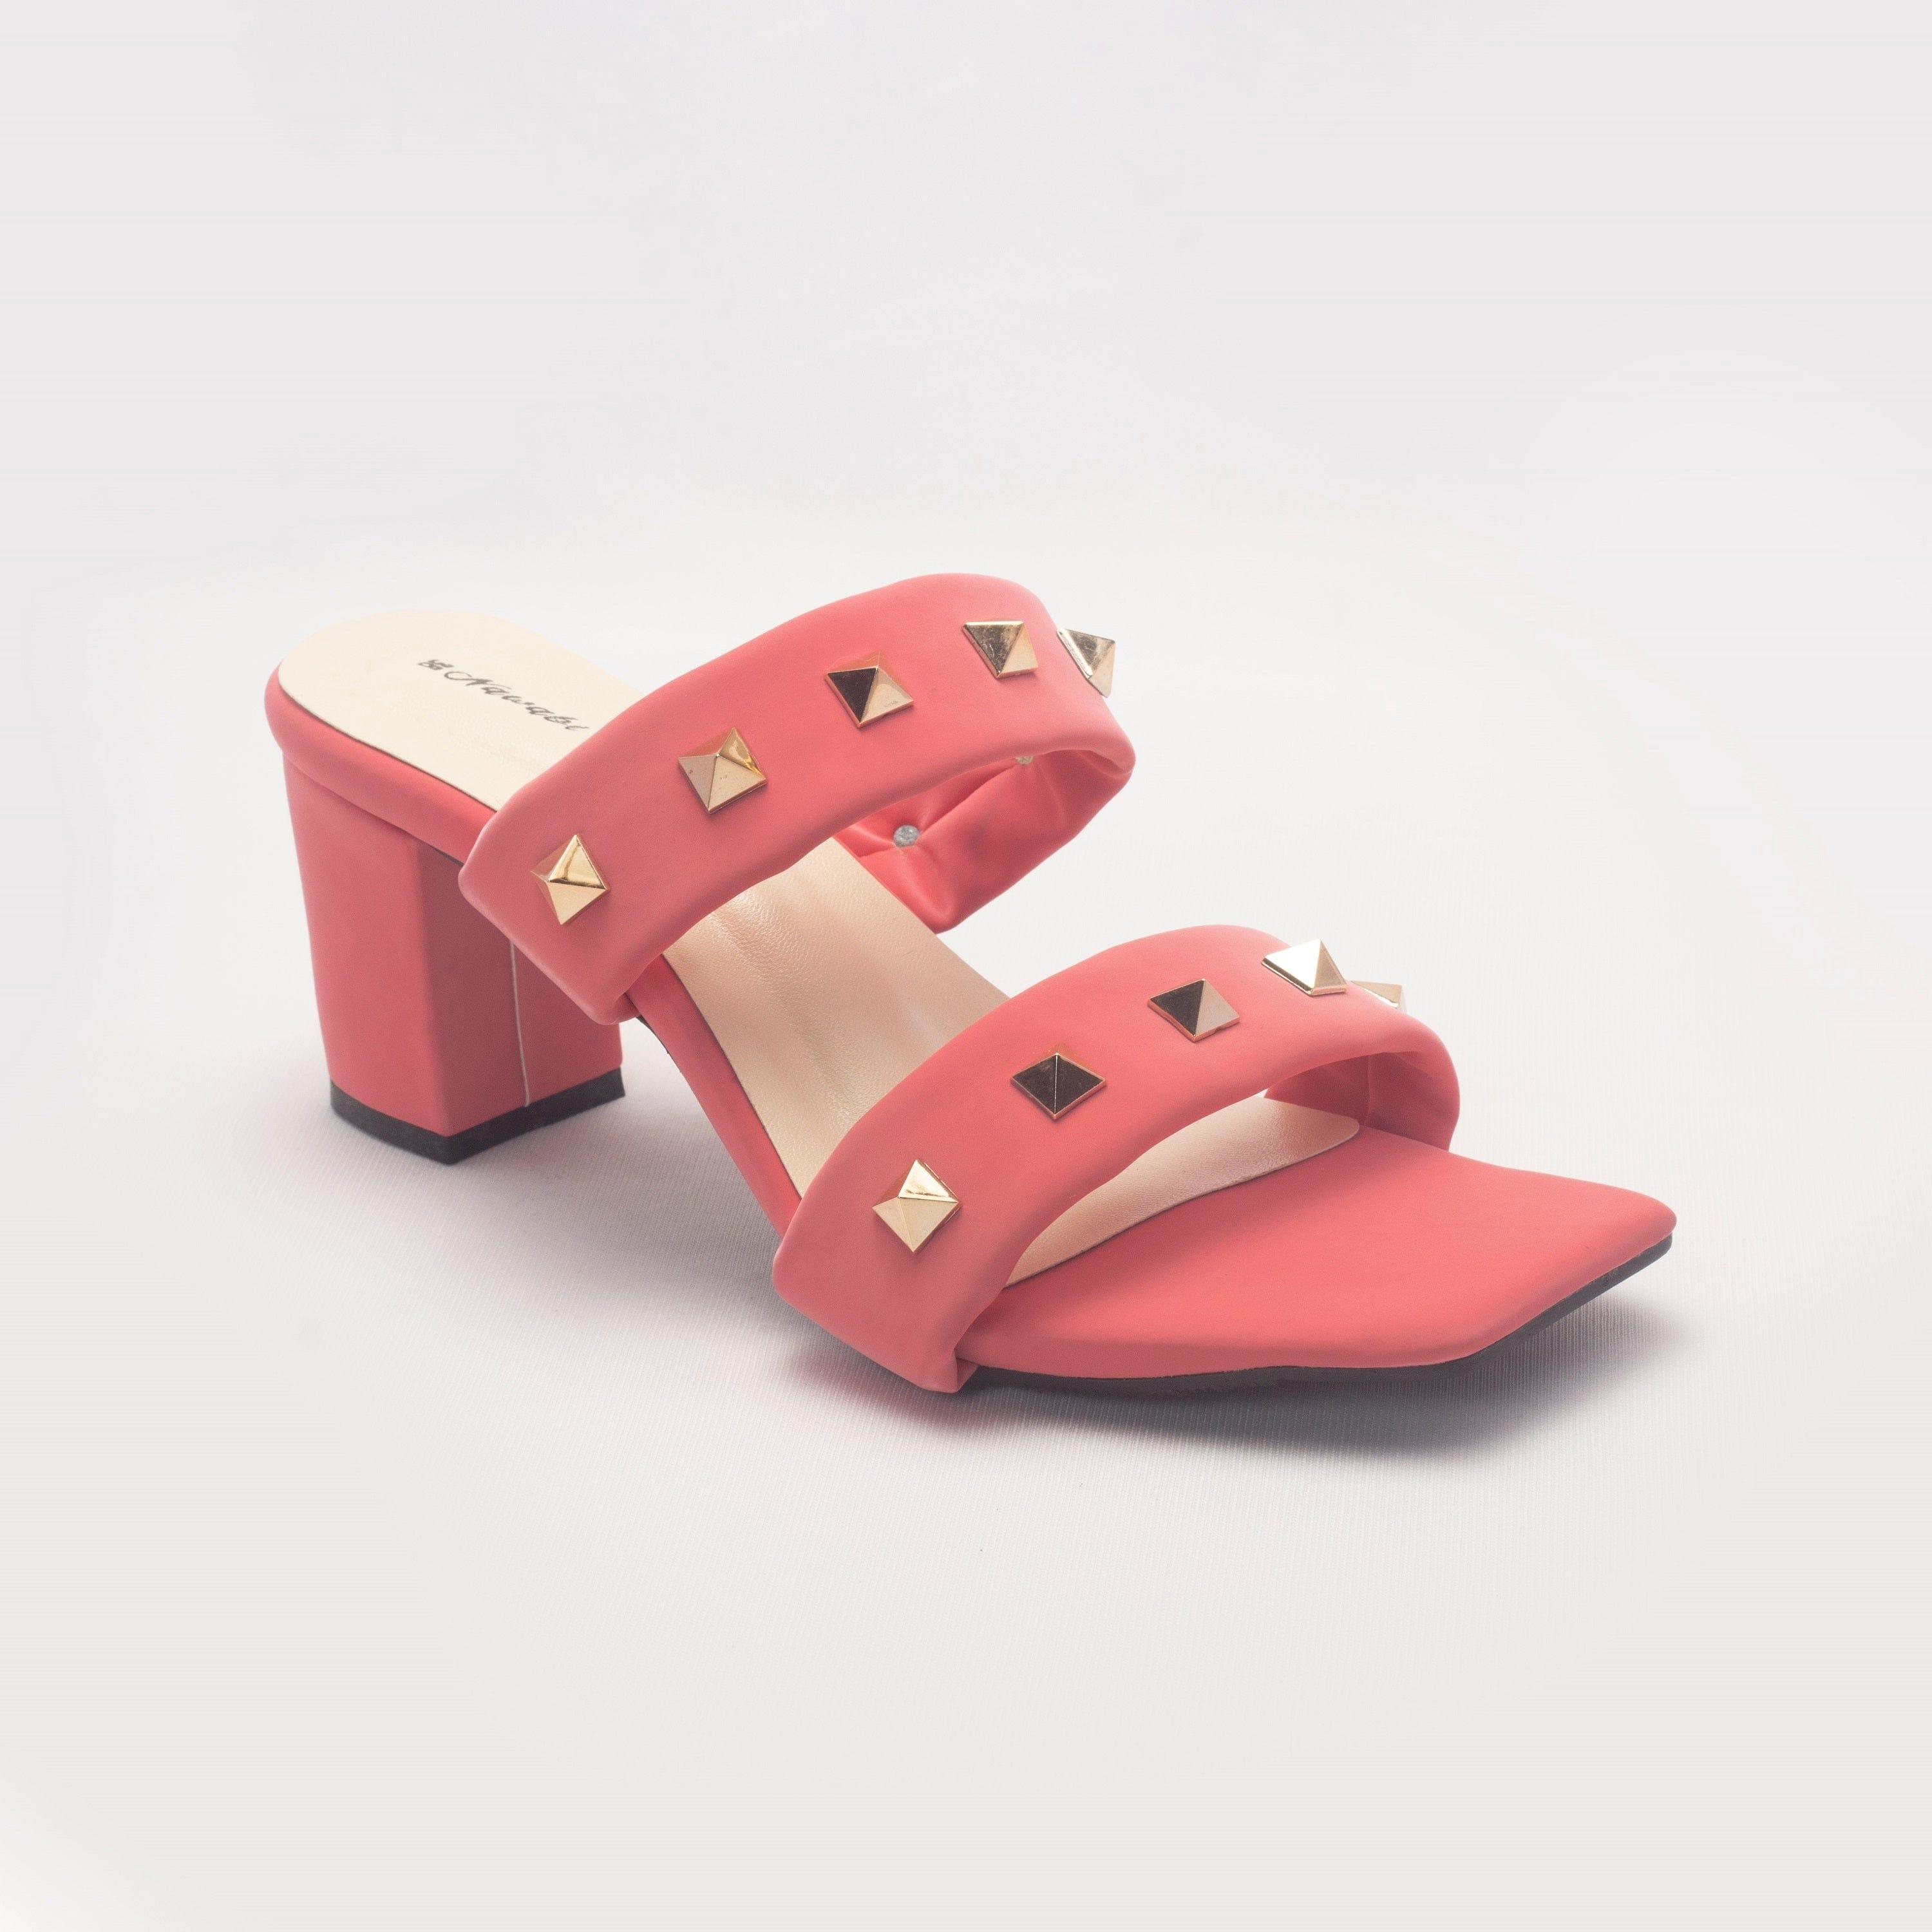 $100 NWT Vince Camuto Corlina Ankle Strap Block Heel Suede Sandal Coral  Pink NEW | eBay